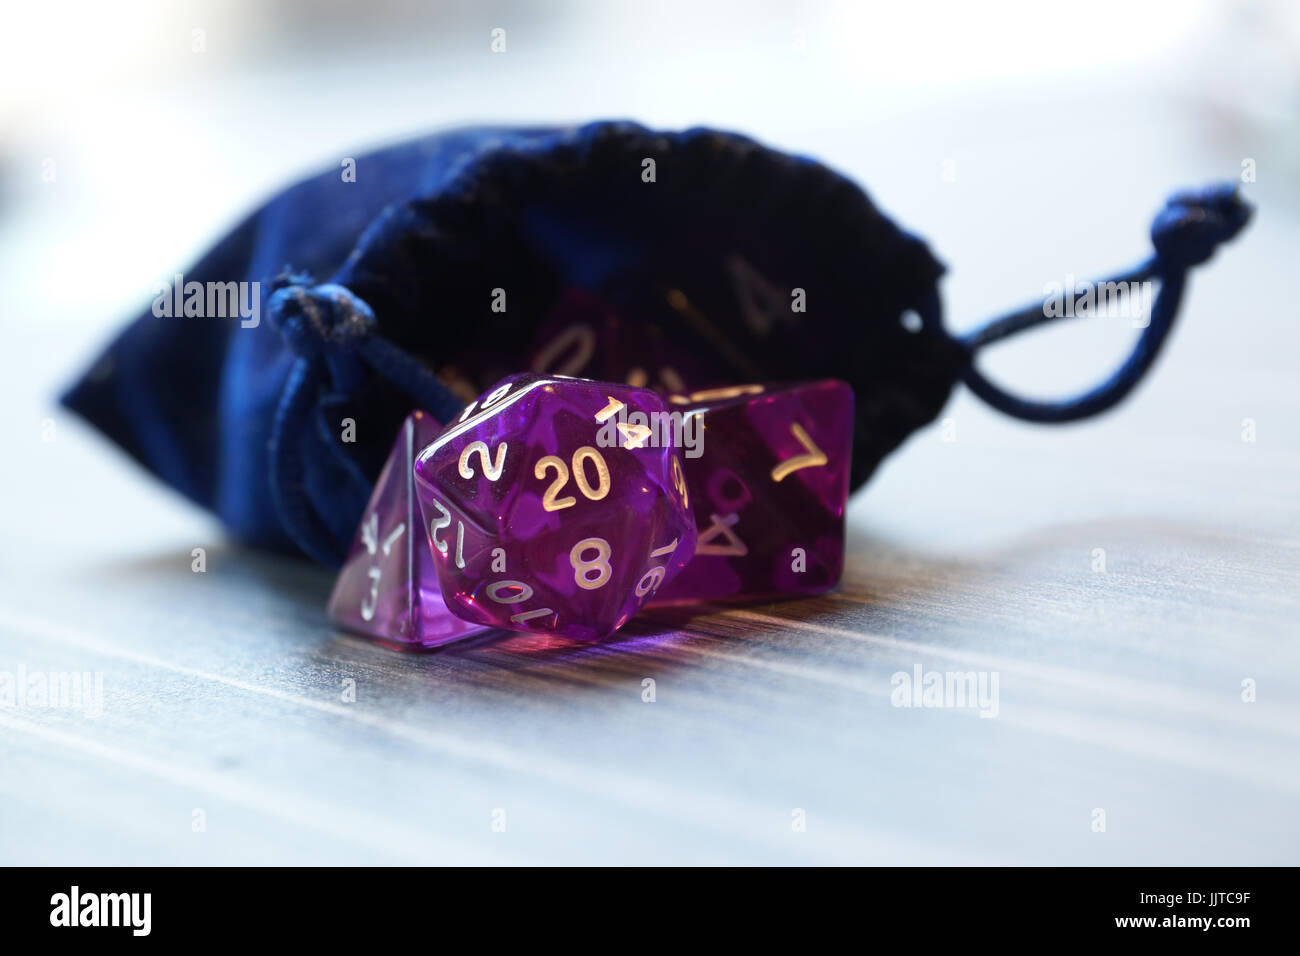 A set of polyhedral dice used for role playing games such as Dungeons & Dragons, the dice are used to determine how successful a player is in their ac Stock Photo